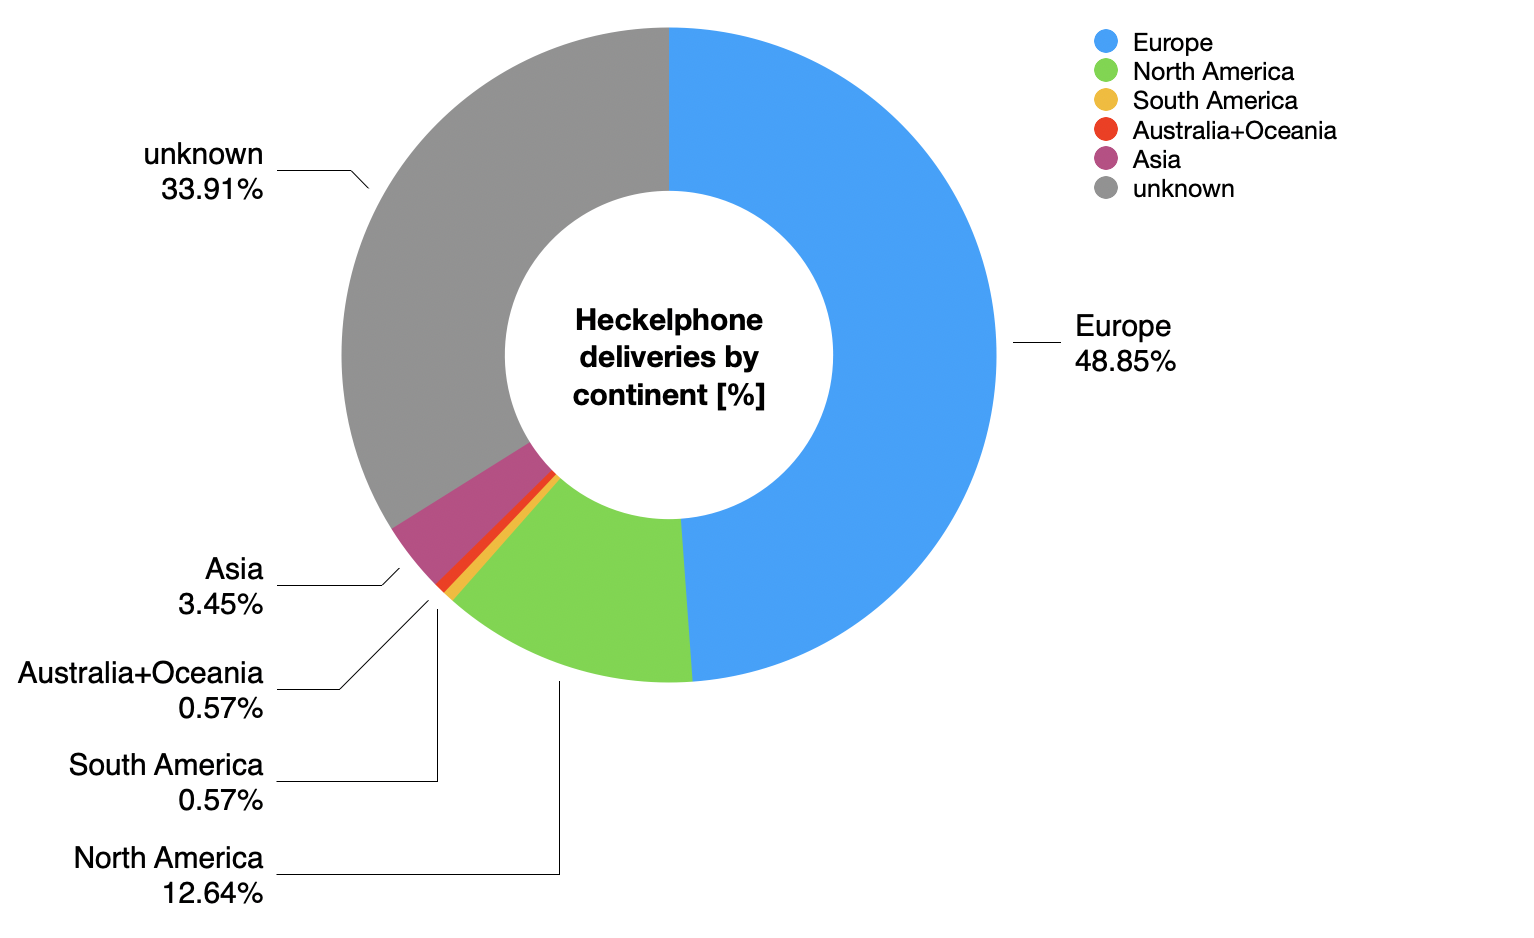 Heckelphone deliveries by continent in %